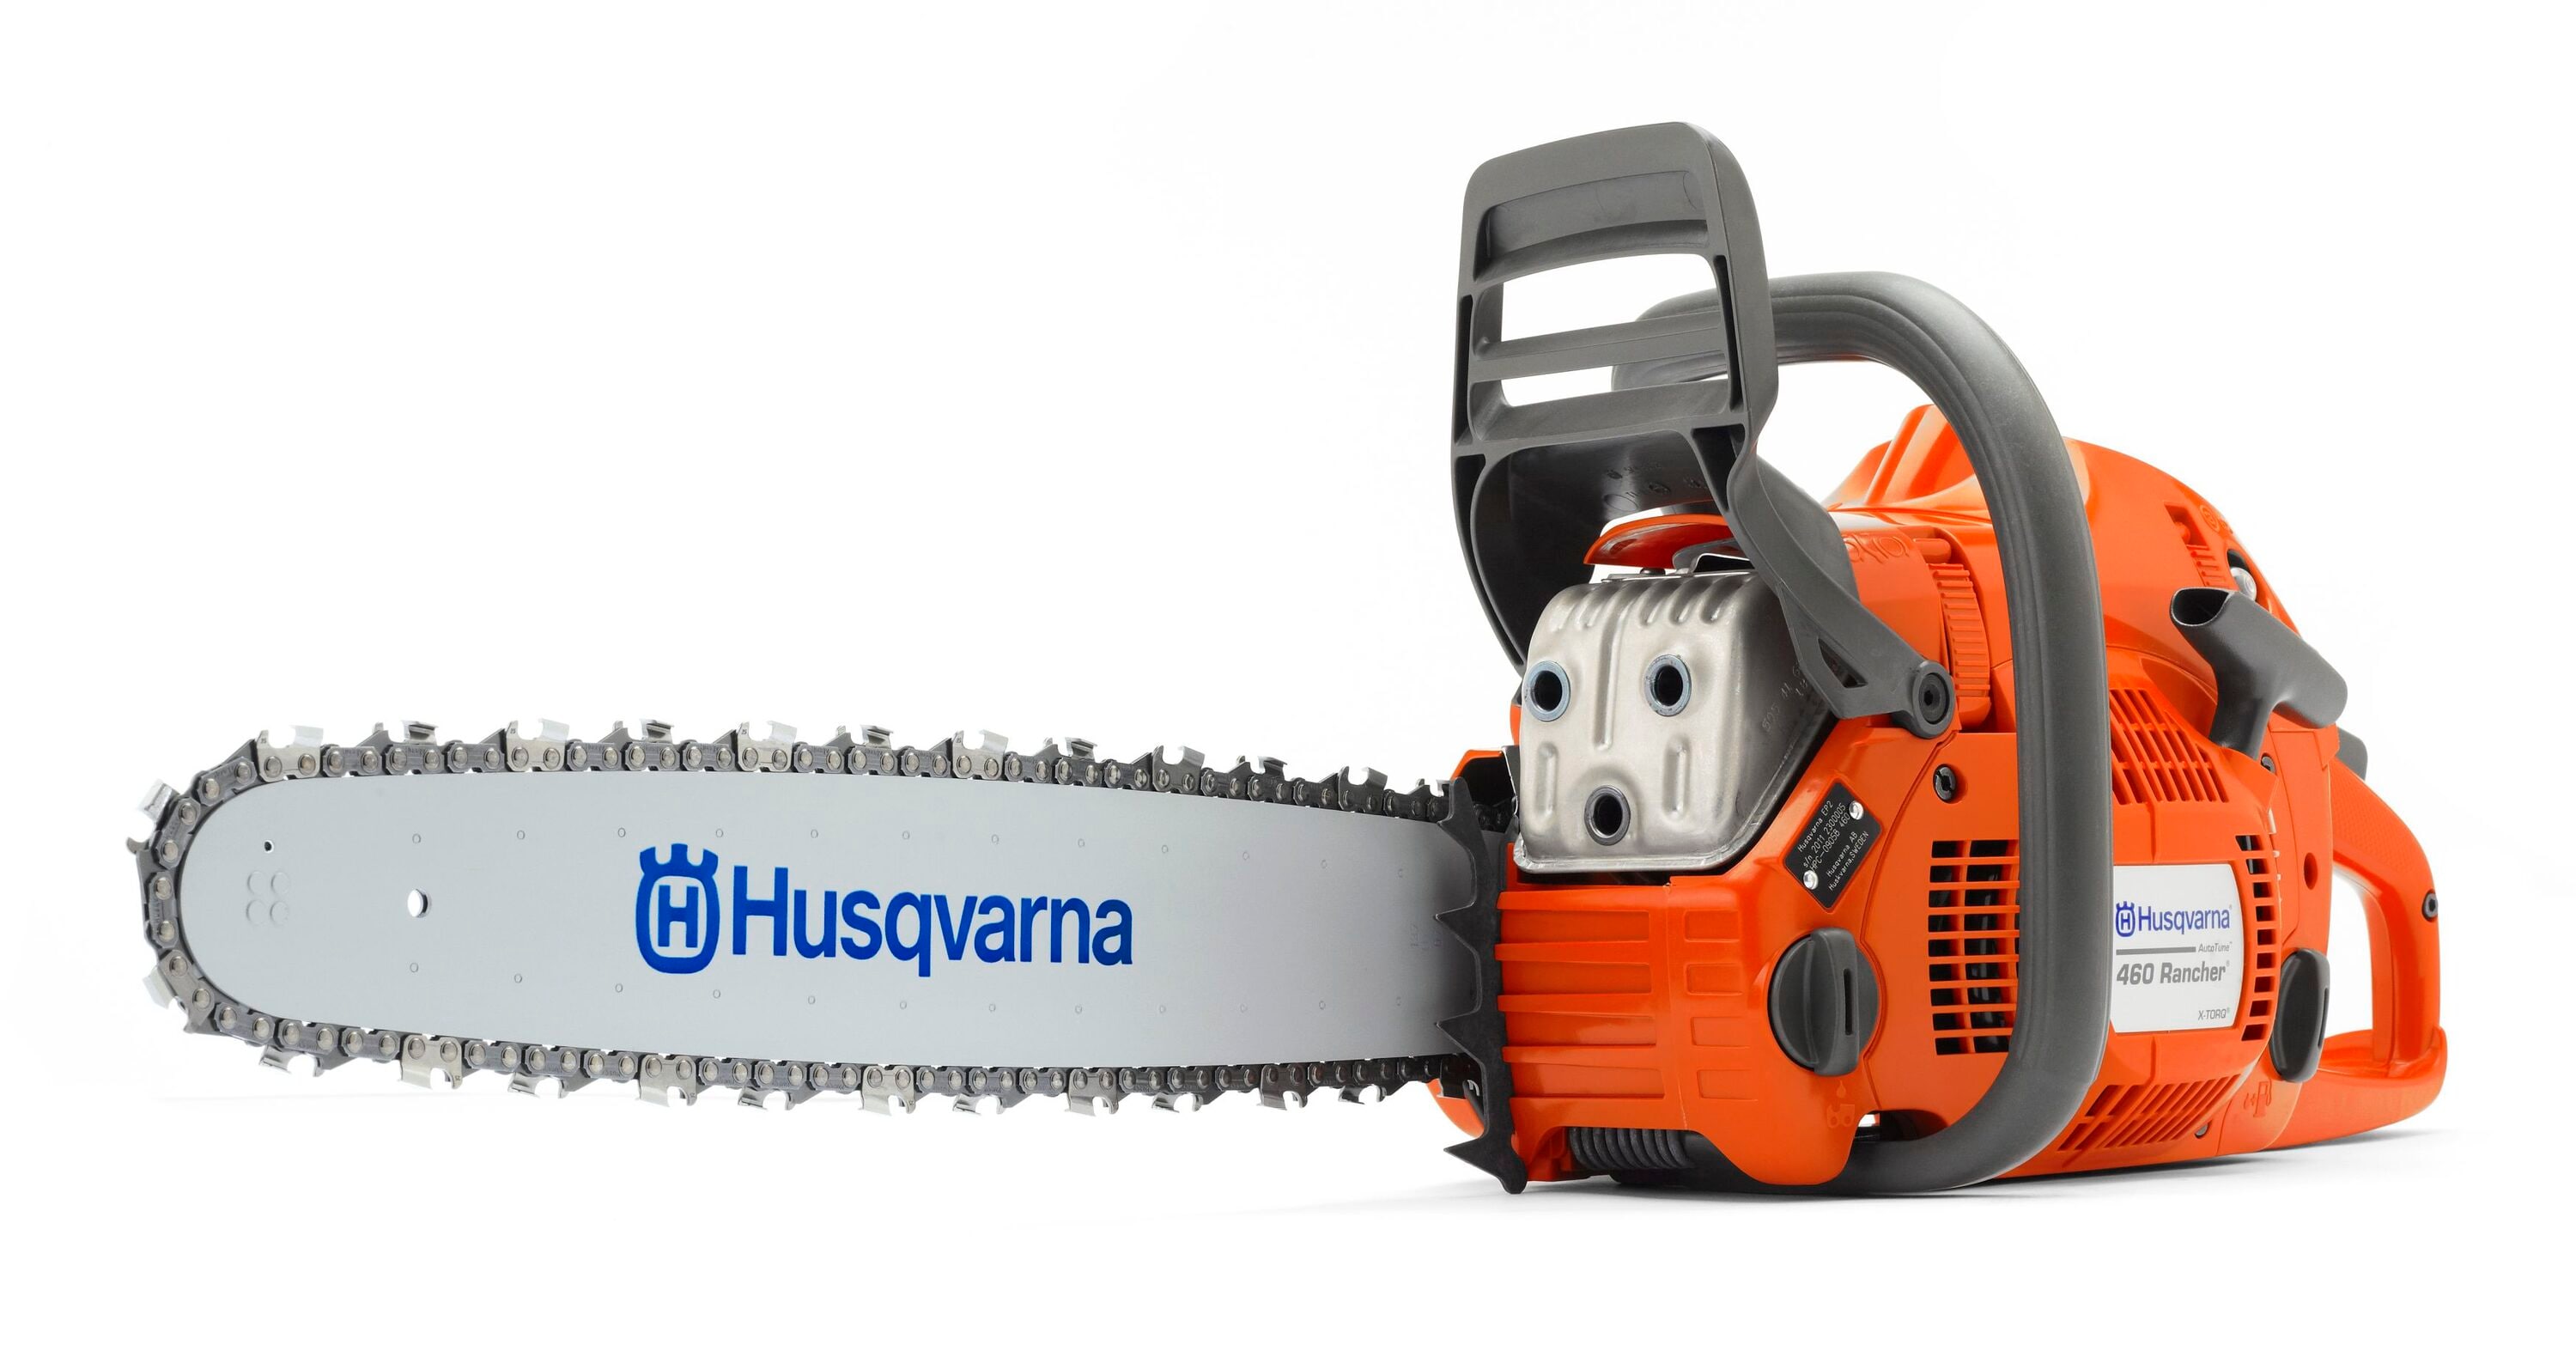 The 8 Best Gas Chainsaws of 2023